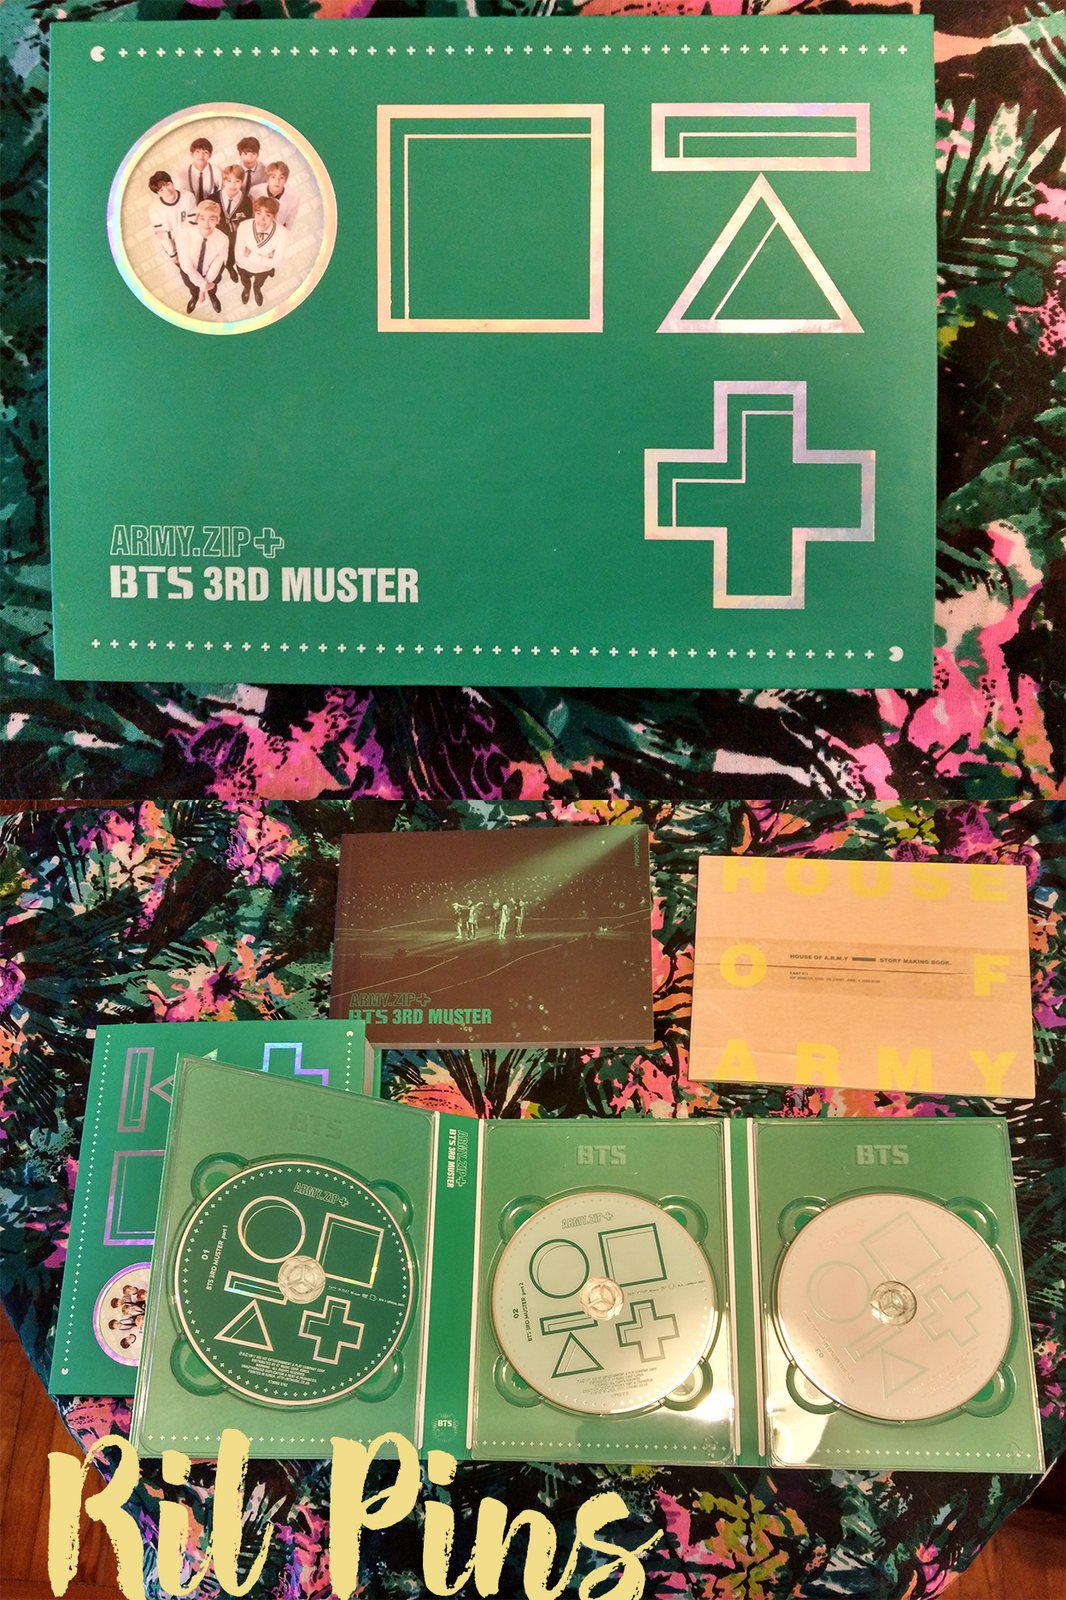 Official BTS 3rd Muster ARMY.ZIP+ DVD 3 Discs + Photobooks No